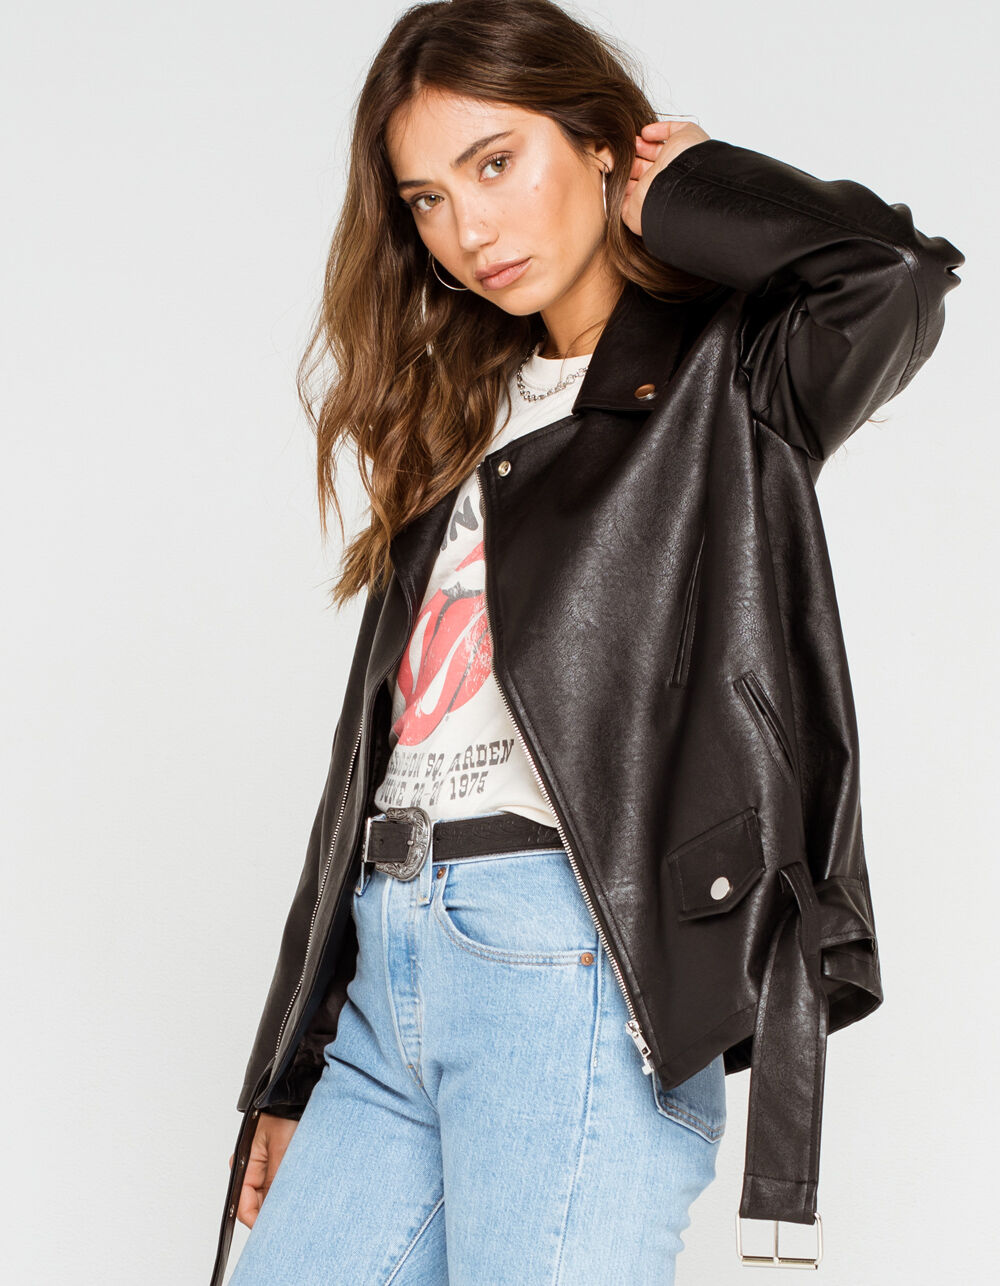 KNOW ONE CARES Oversized Womens Moto Jacket - BLACK | Tillys